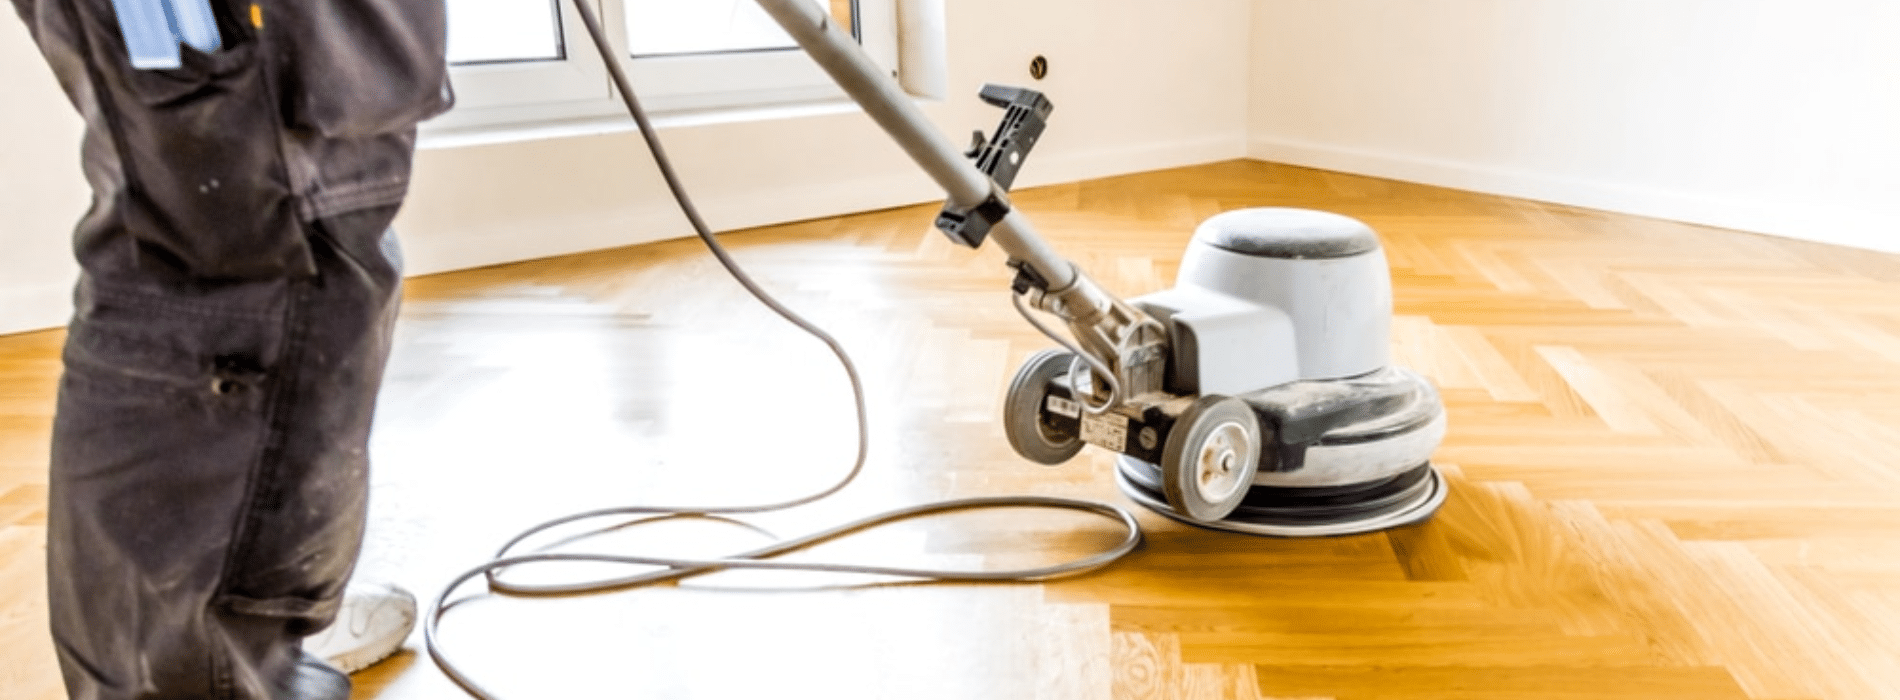 Mr Sander® at work, using the powerful Bona buffer sander with the specifications - Effect: 2200, Voltage: 230, Frequency: 50, and Size: 200x750 mm. They are seen restoring herringbone floors to perfection in Golders Green, NW11, using a highly efficient dust extraction system with a HEPA filter, providing flawless results in a dust-free environment.